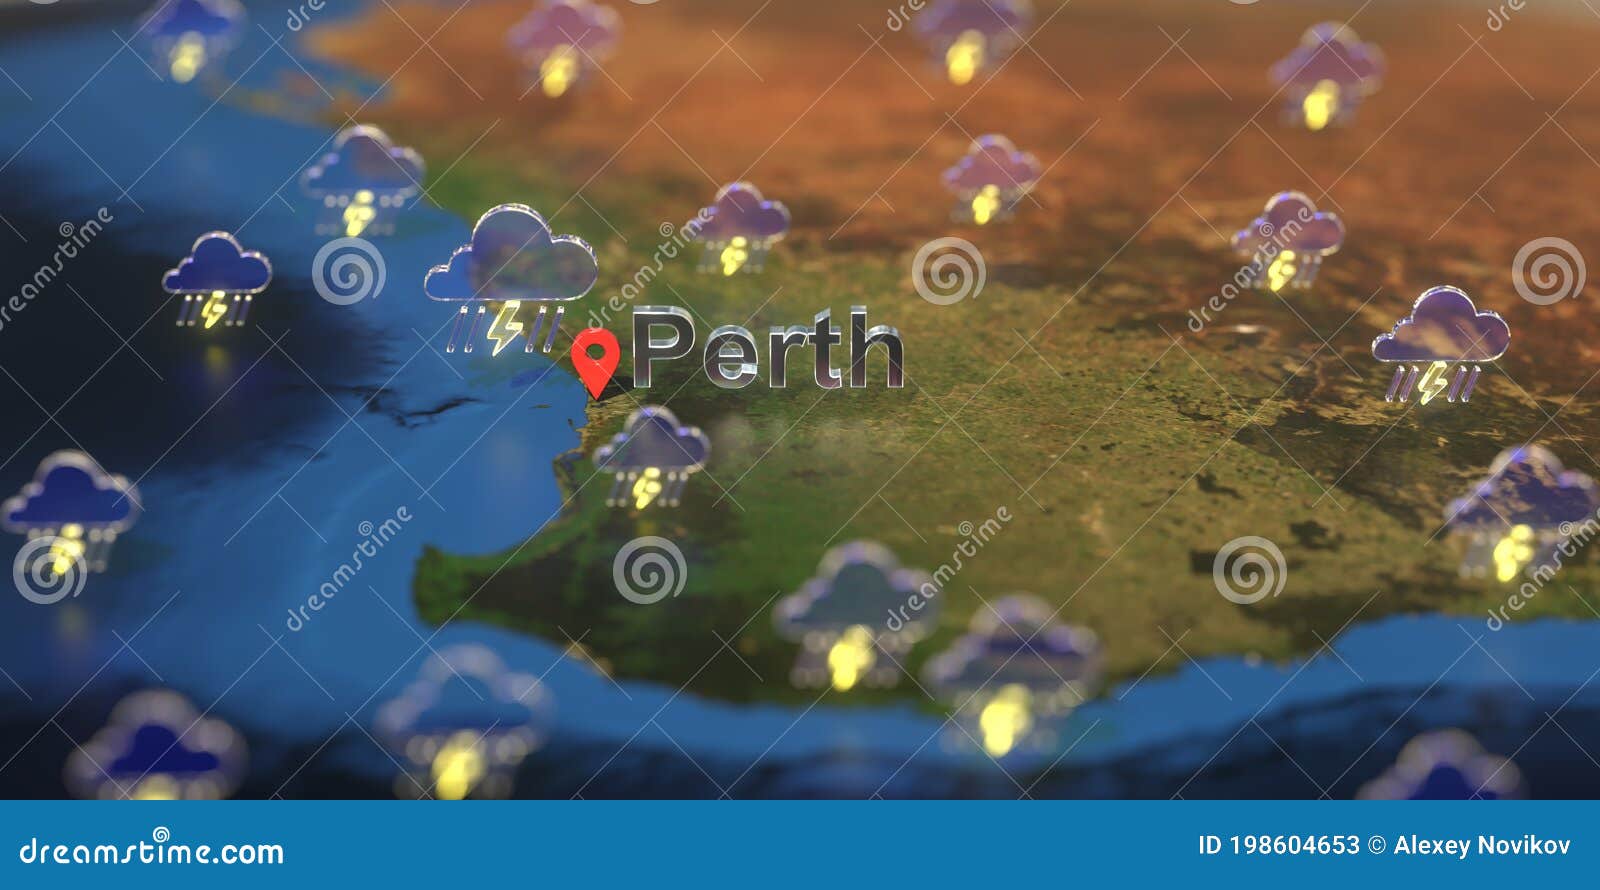 Stormy Weather Icons Near Perth City On The Map Weather Forecast Related 3d Rendering Stock Illustration Illustration Of Stormy Destination 198604653